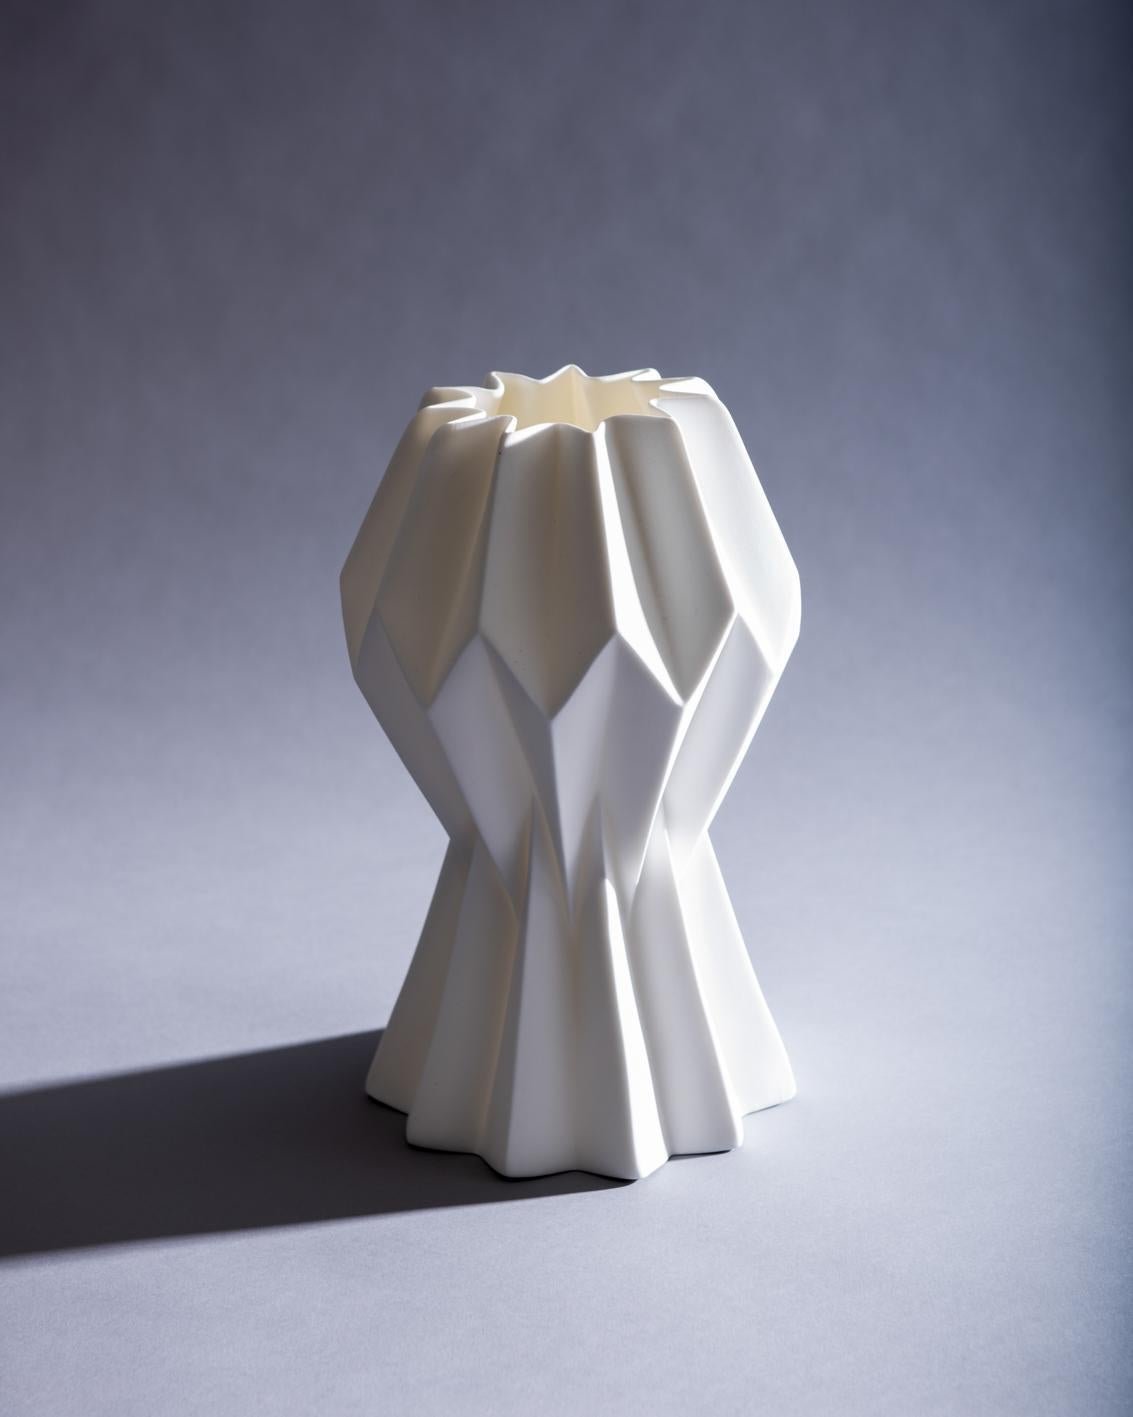 Slump vase, no slump variation, capturing ideas of form, structure and failure, the pleated paper form is translated into a fine bone china that is stressed through the excessive heat of the furnace into a poetic collapse. Developed in the studio of